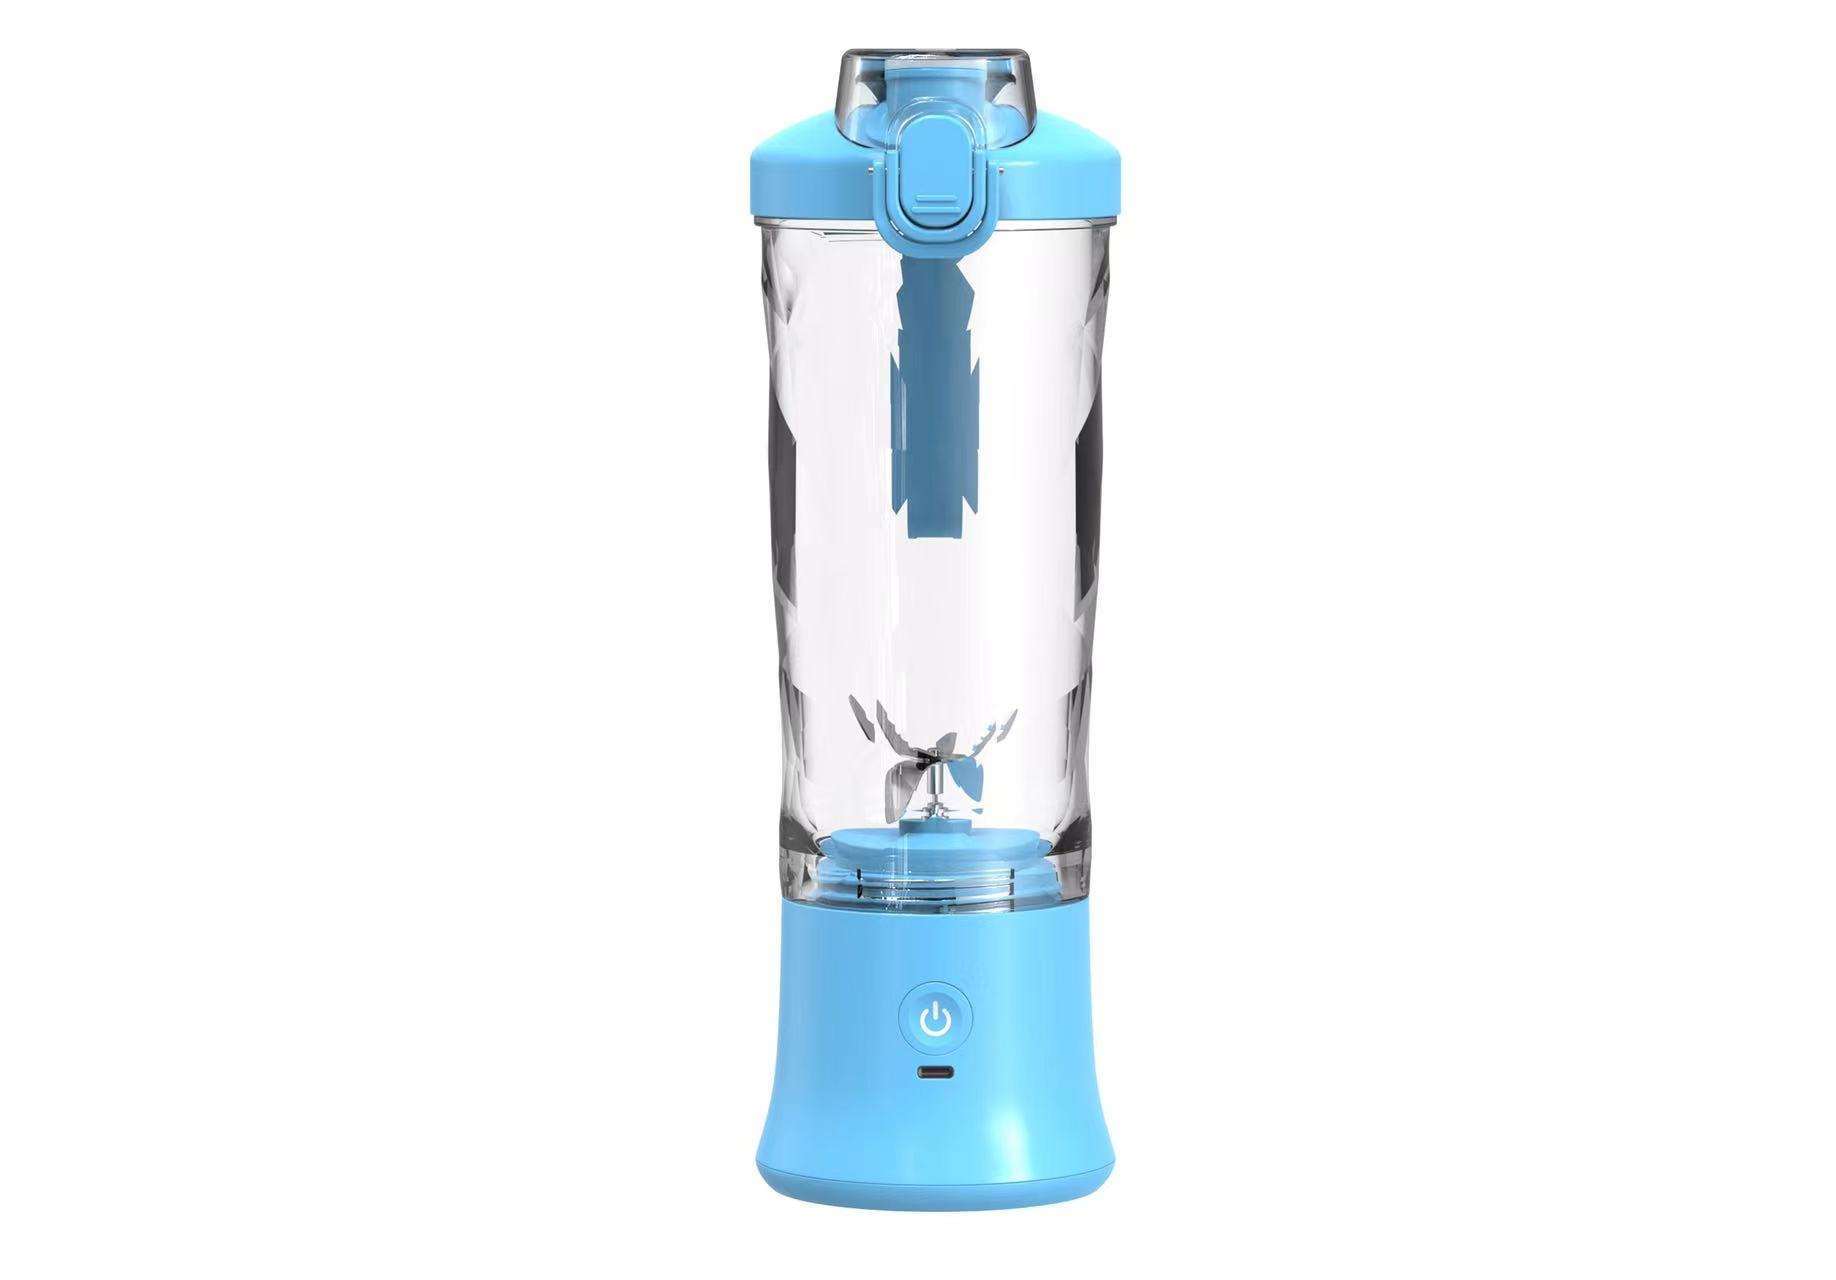 Transparent electric Dual-purpose Juicing Cup with a green base and lid, featuring stainless steel blades and a central blending shaft, along with an on/off button at the front.